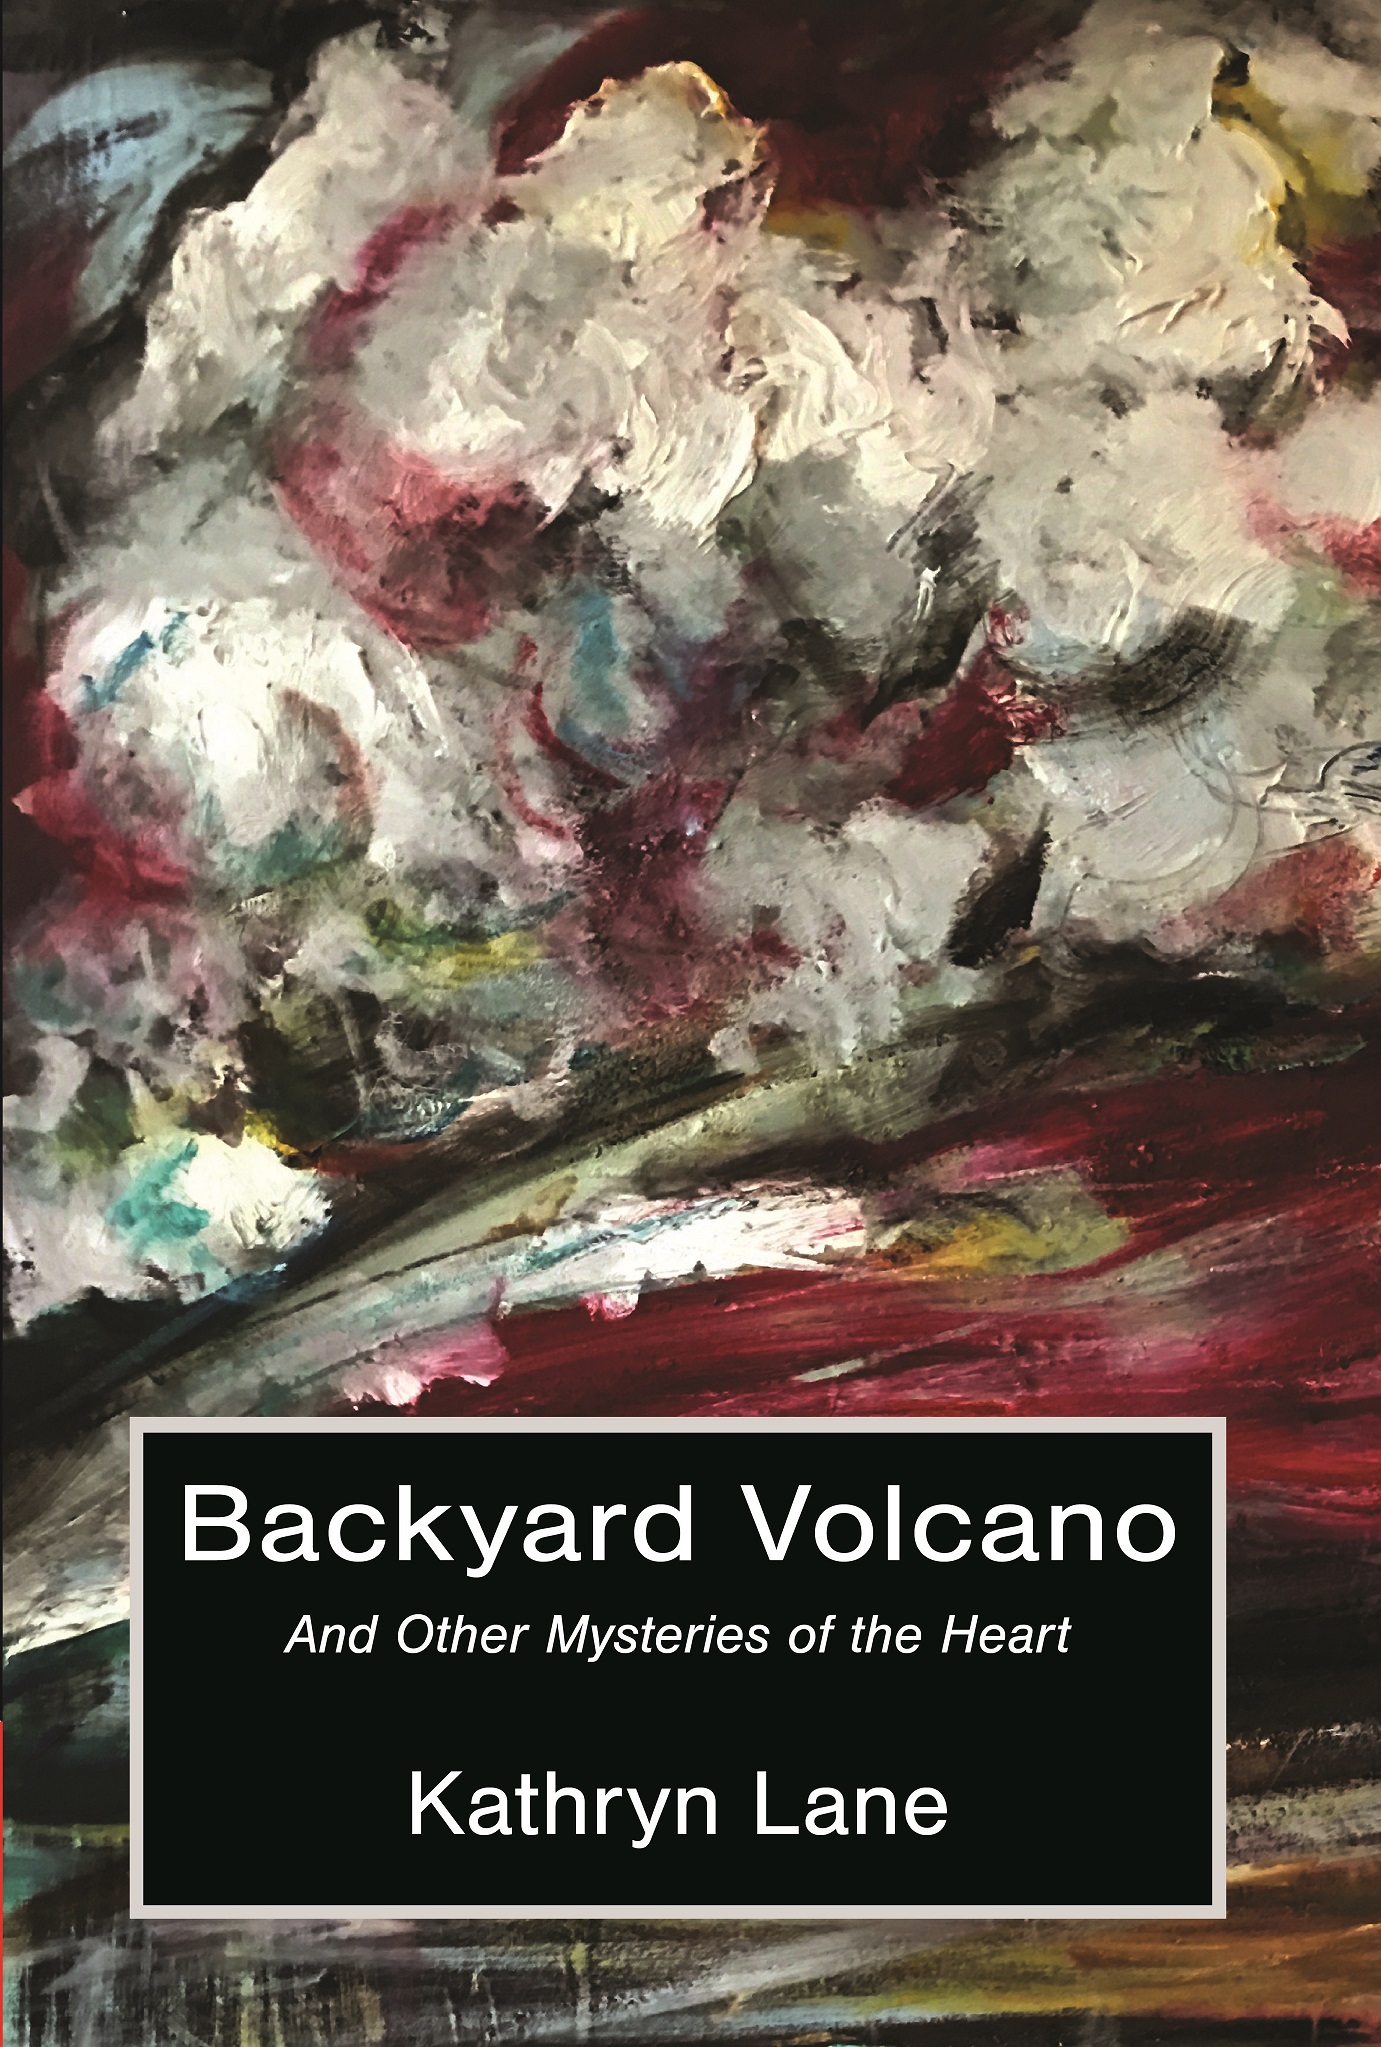 Backyard Volcano and Other Mysteries of the Heart by Kathryn Lane